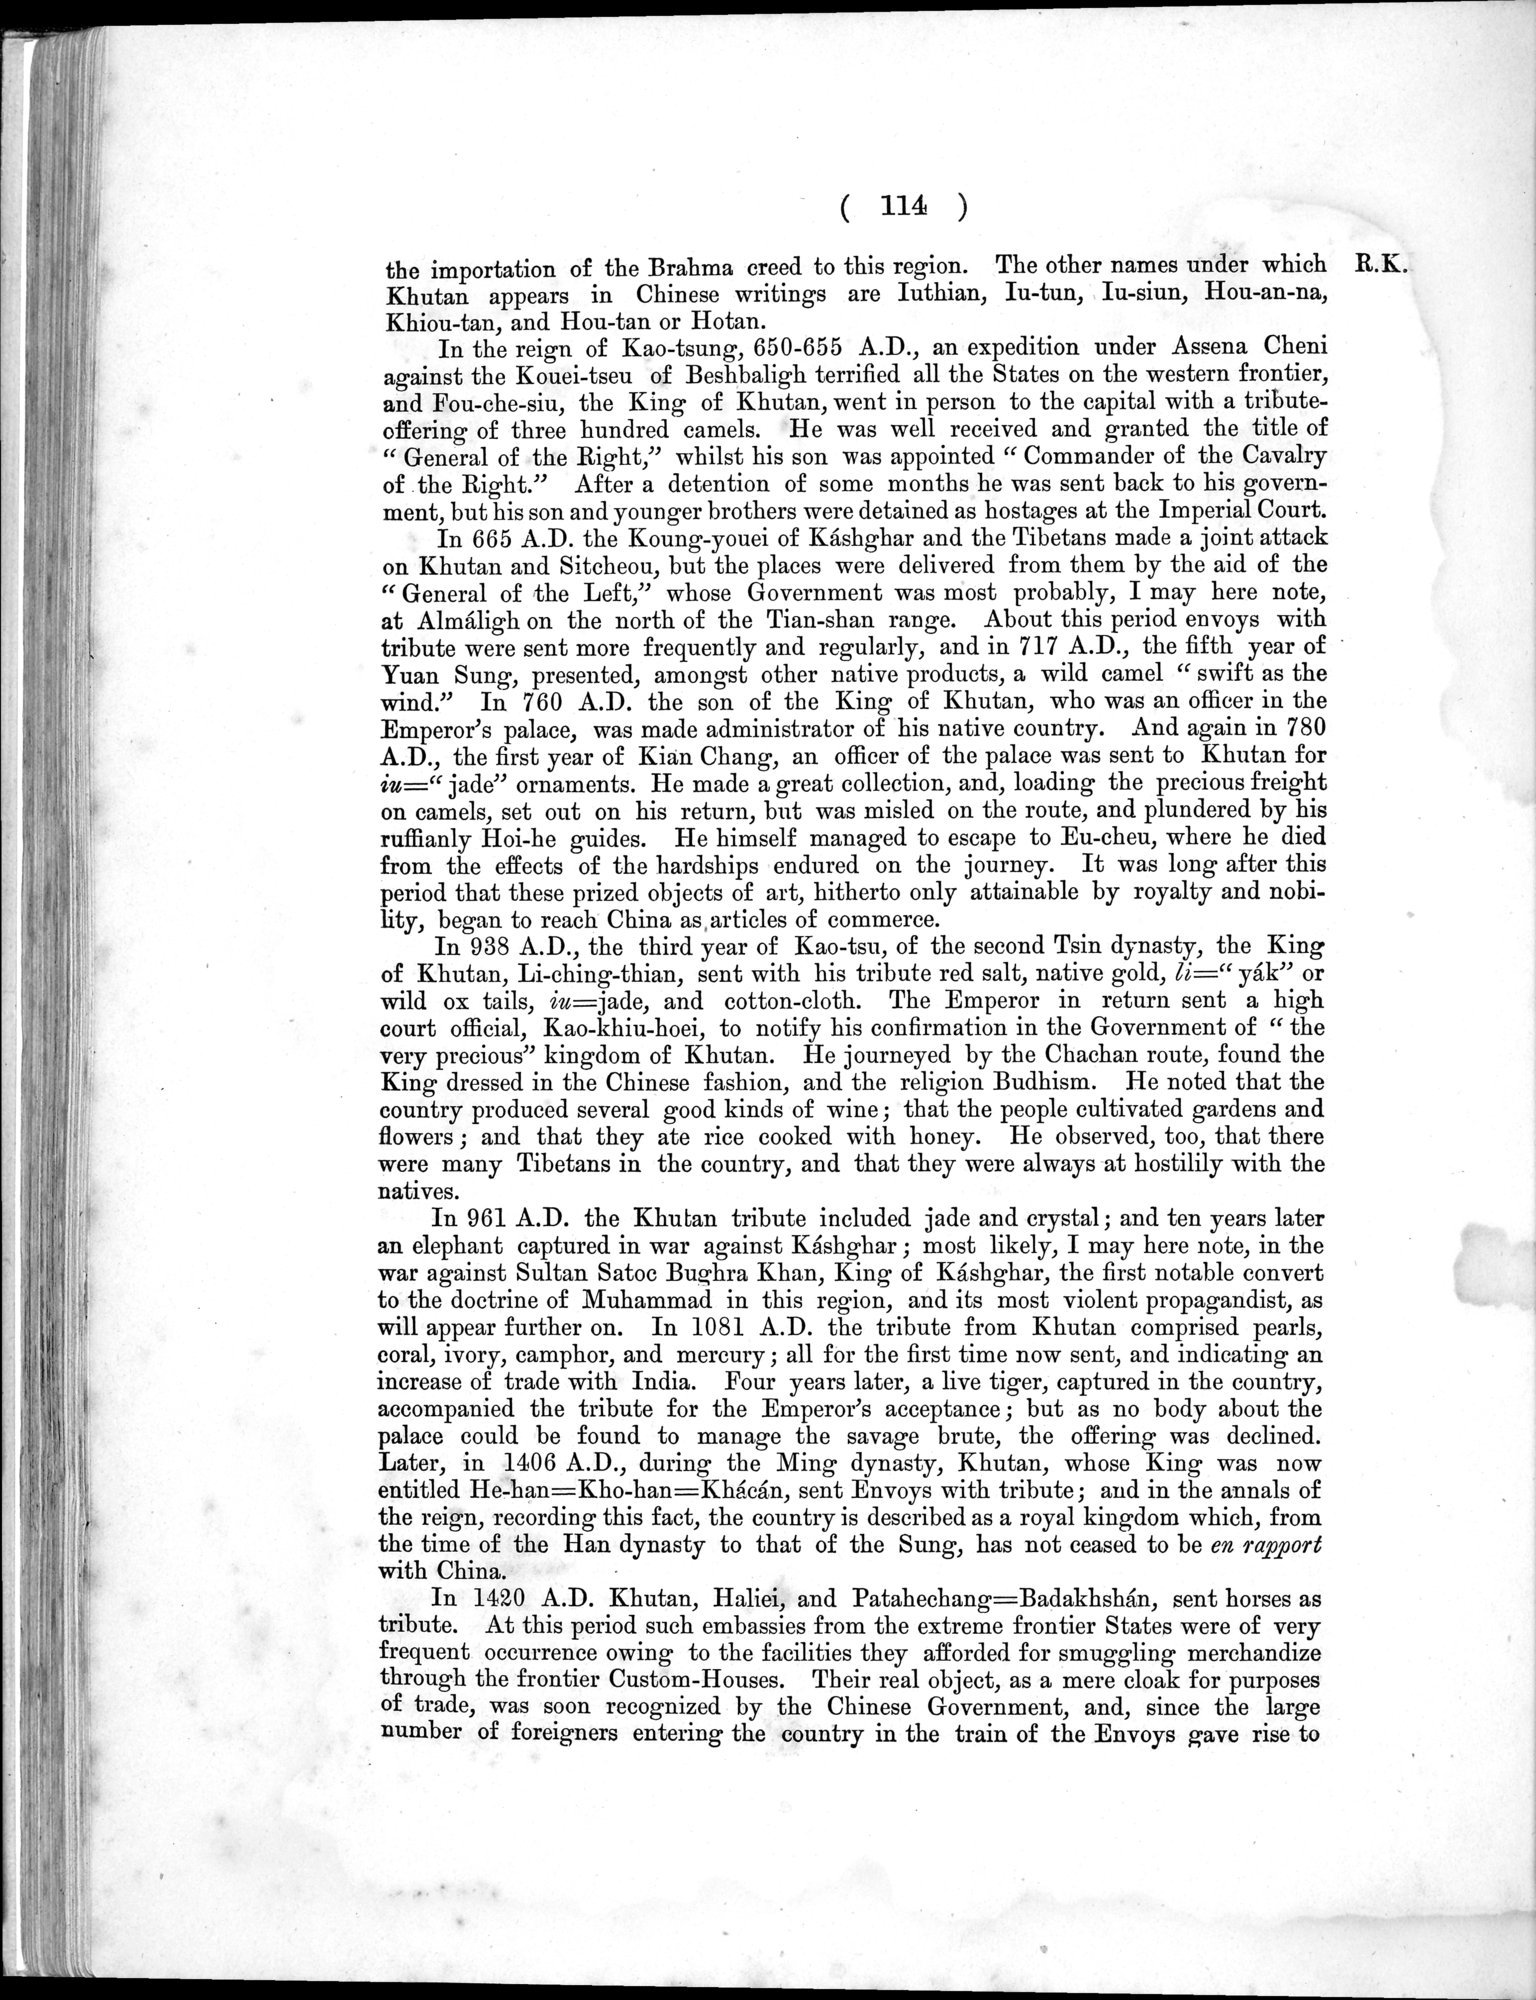 Report of a Mission to Yarkund in 1873 : vol.1 / Page 174 (Grayscale High Resolution Image)